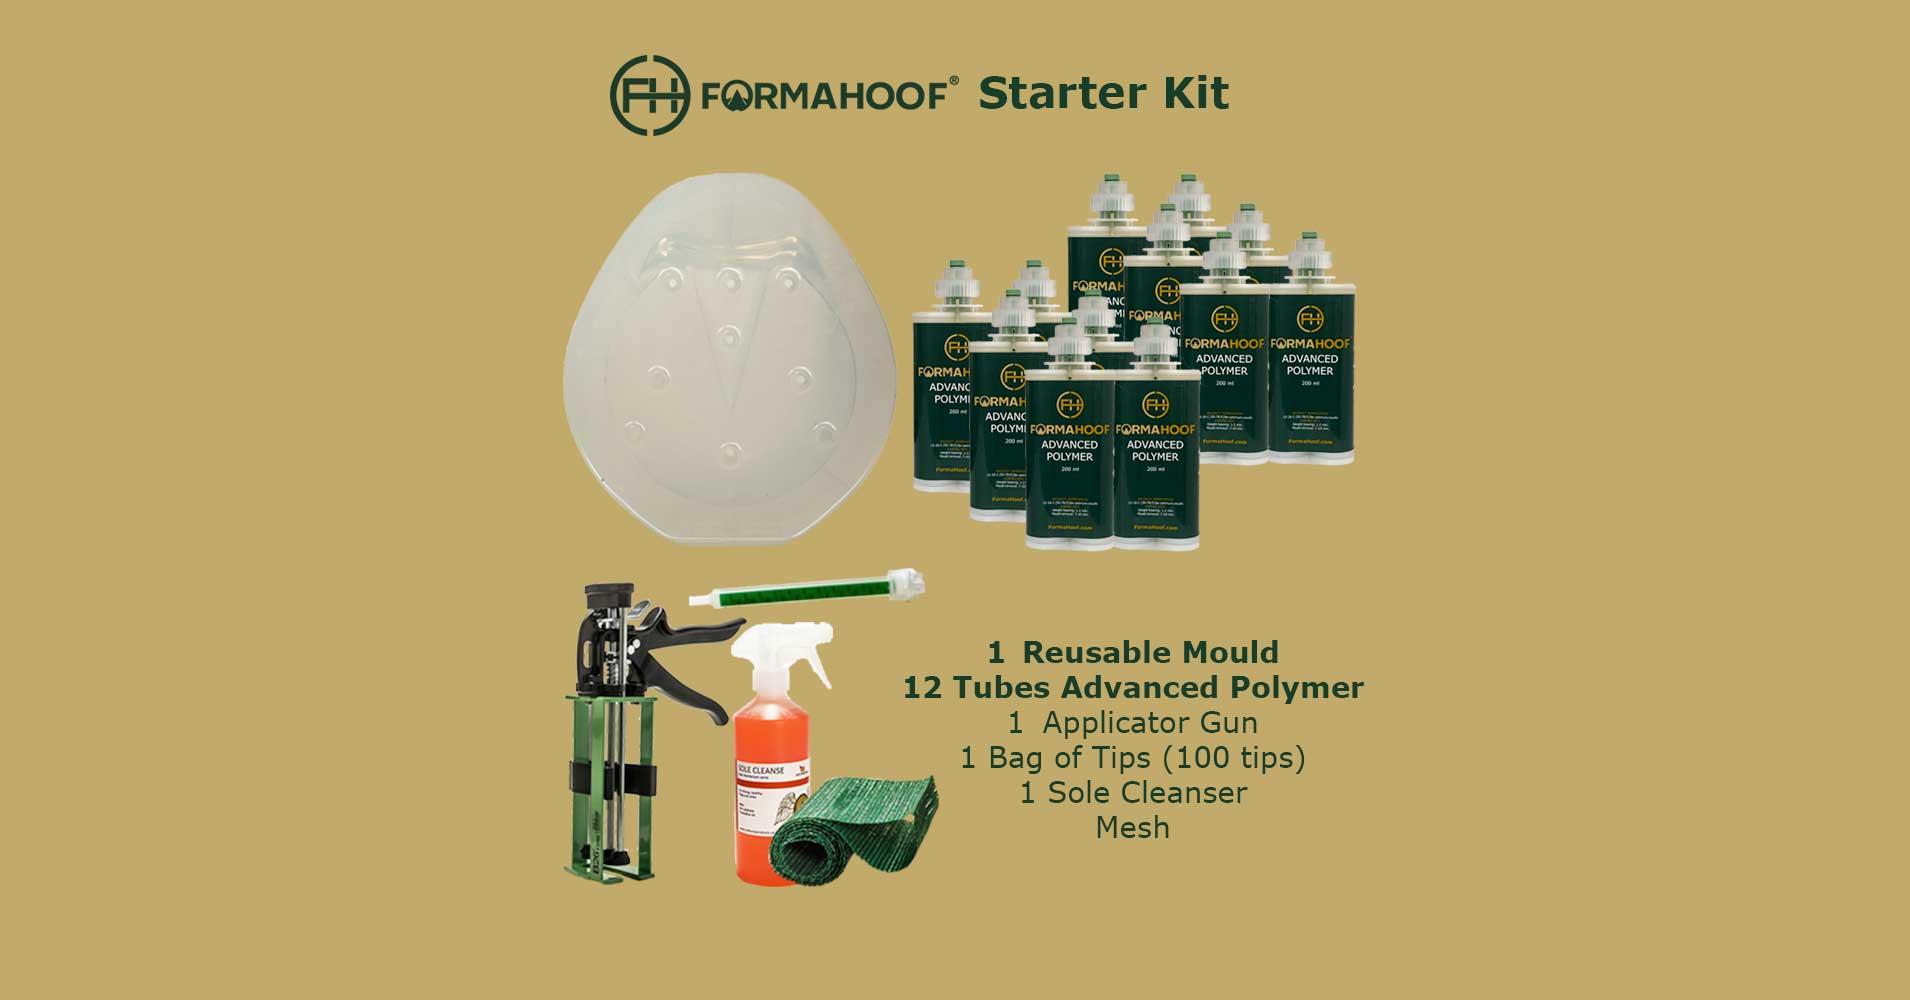 Product FormaHoof Starter Kit - Reusable Hoof Protection and Repair image